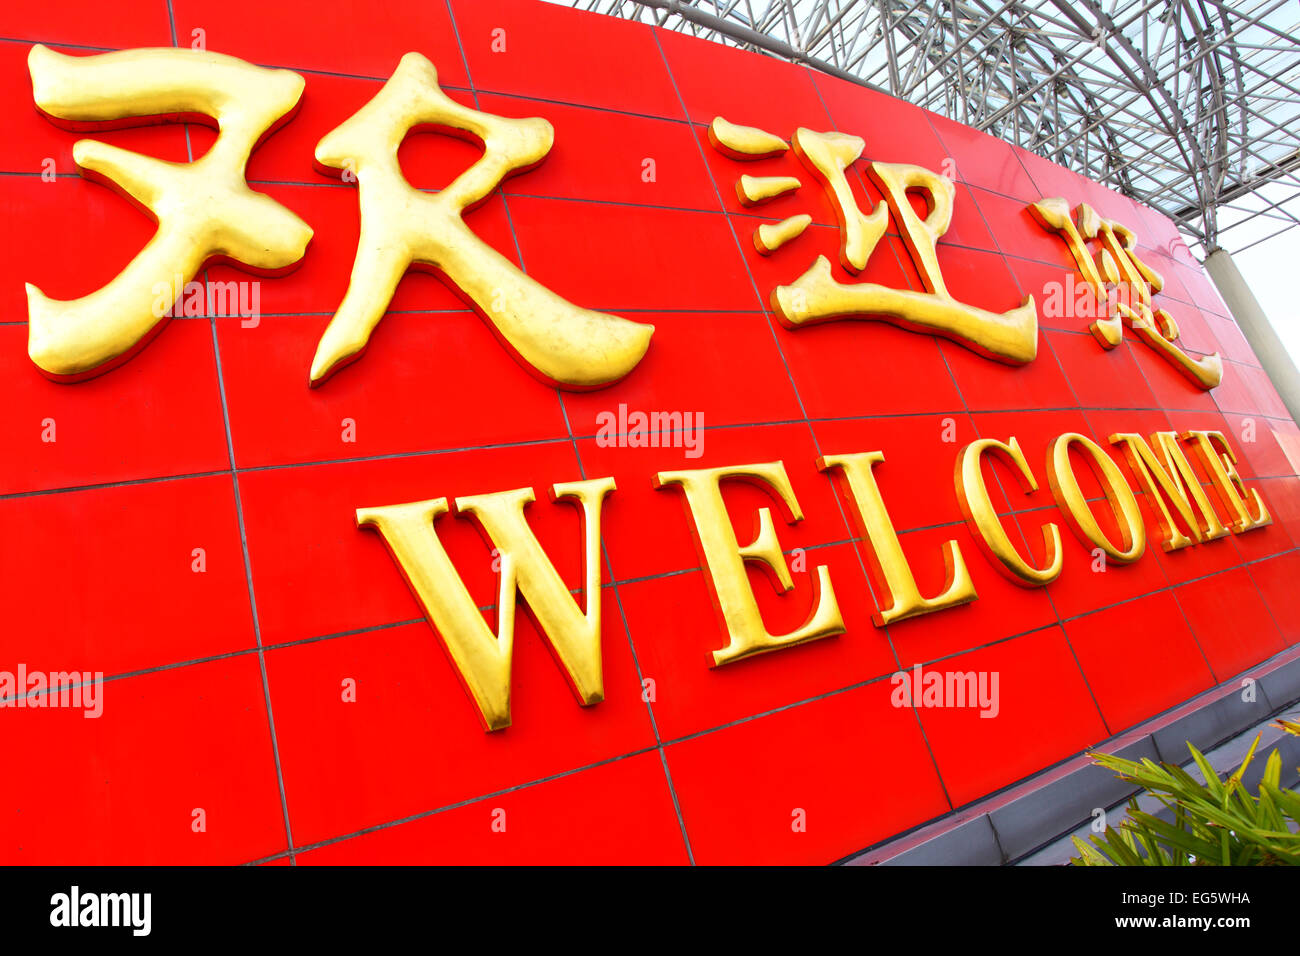 Welcome board with greeting in Chinese and English Stock Photo